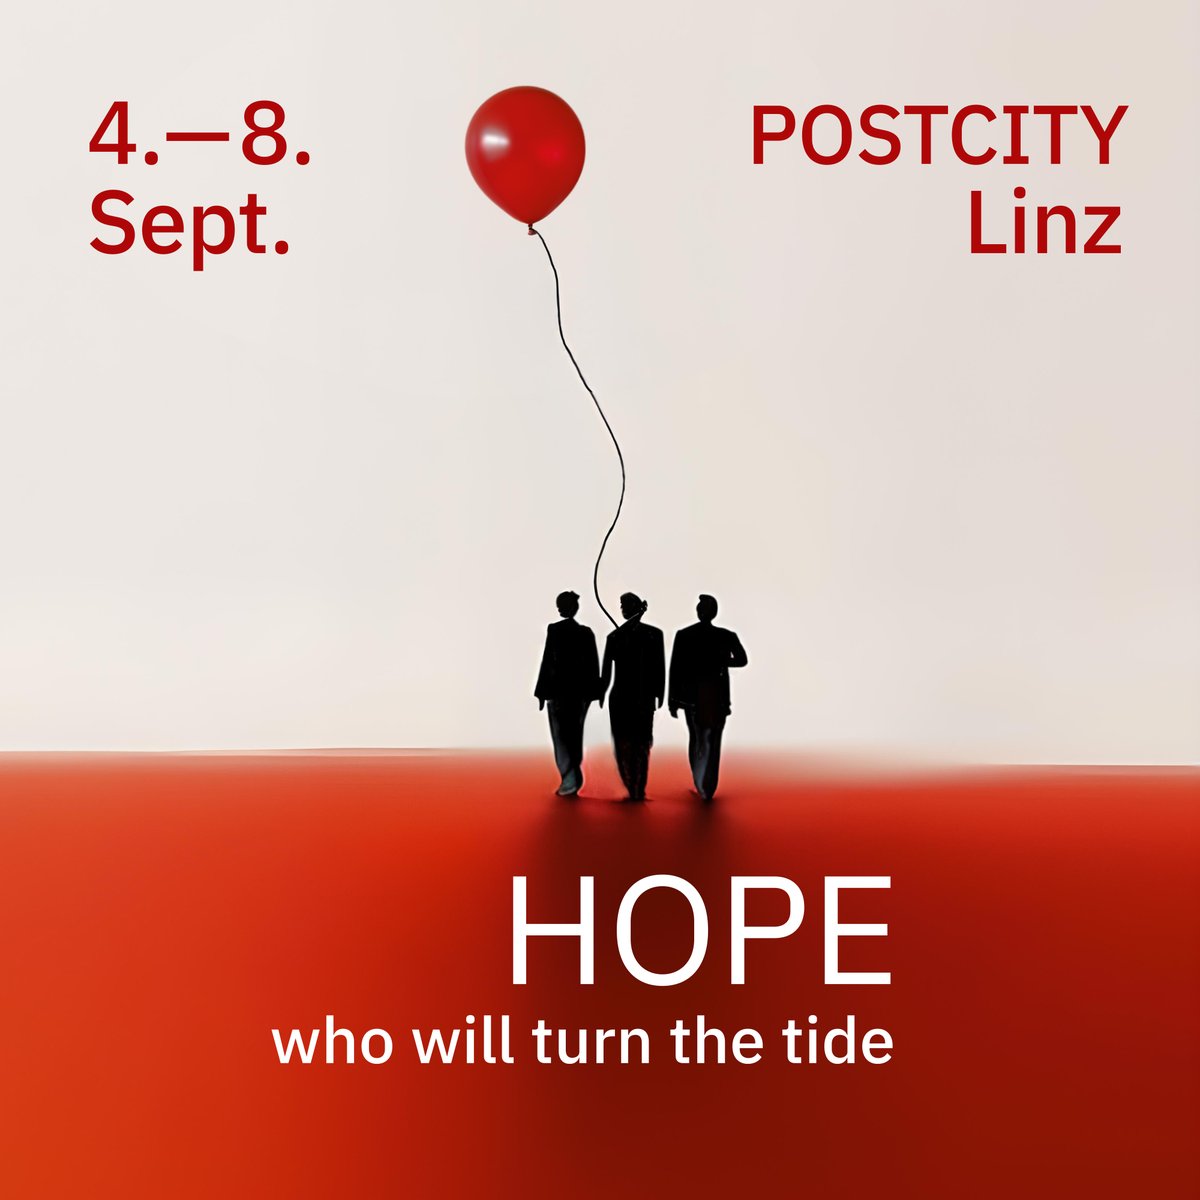 Ars Electronica 2024 will take place in Linz from September 4 to 8 and will be dedicated to the title “HOPE – who will turn the tide”. #arselectronica24 For more information visit ars.electronica.art/hope/en/